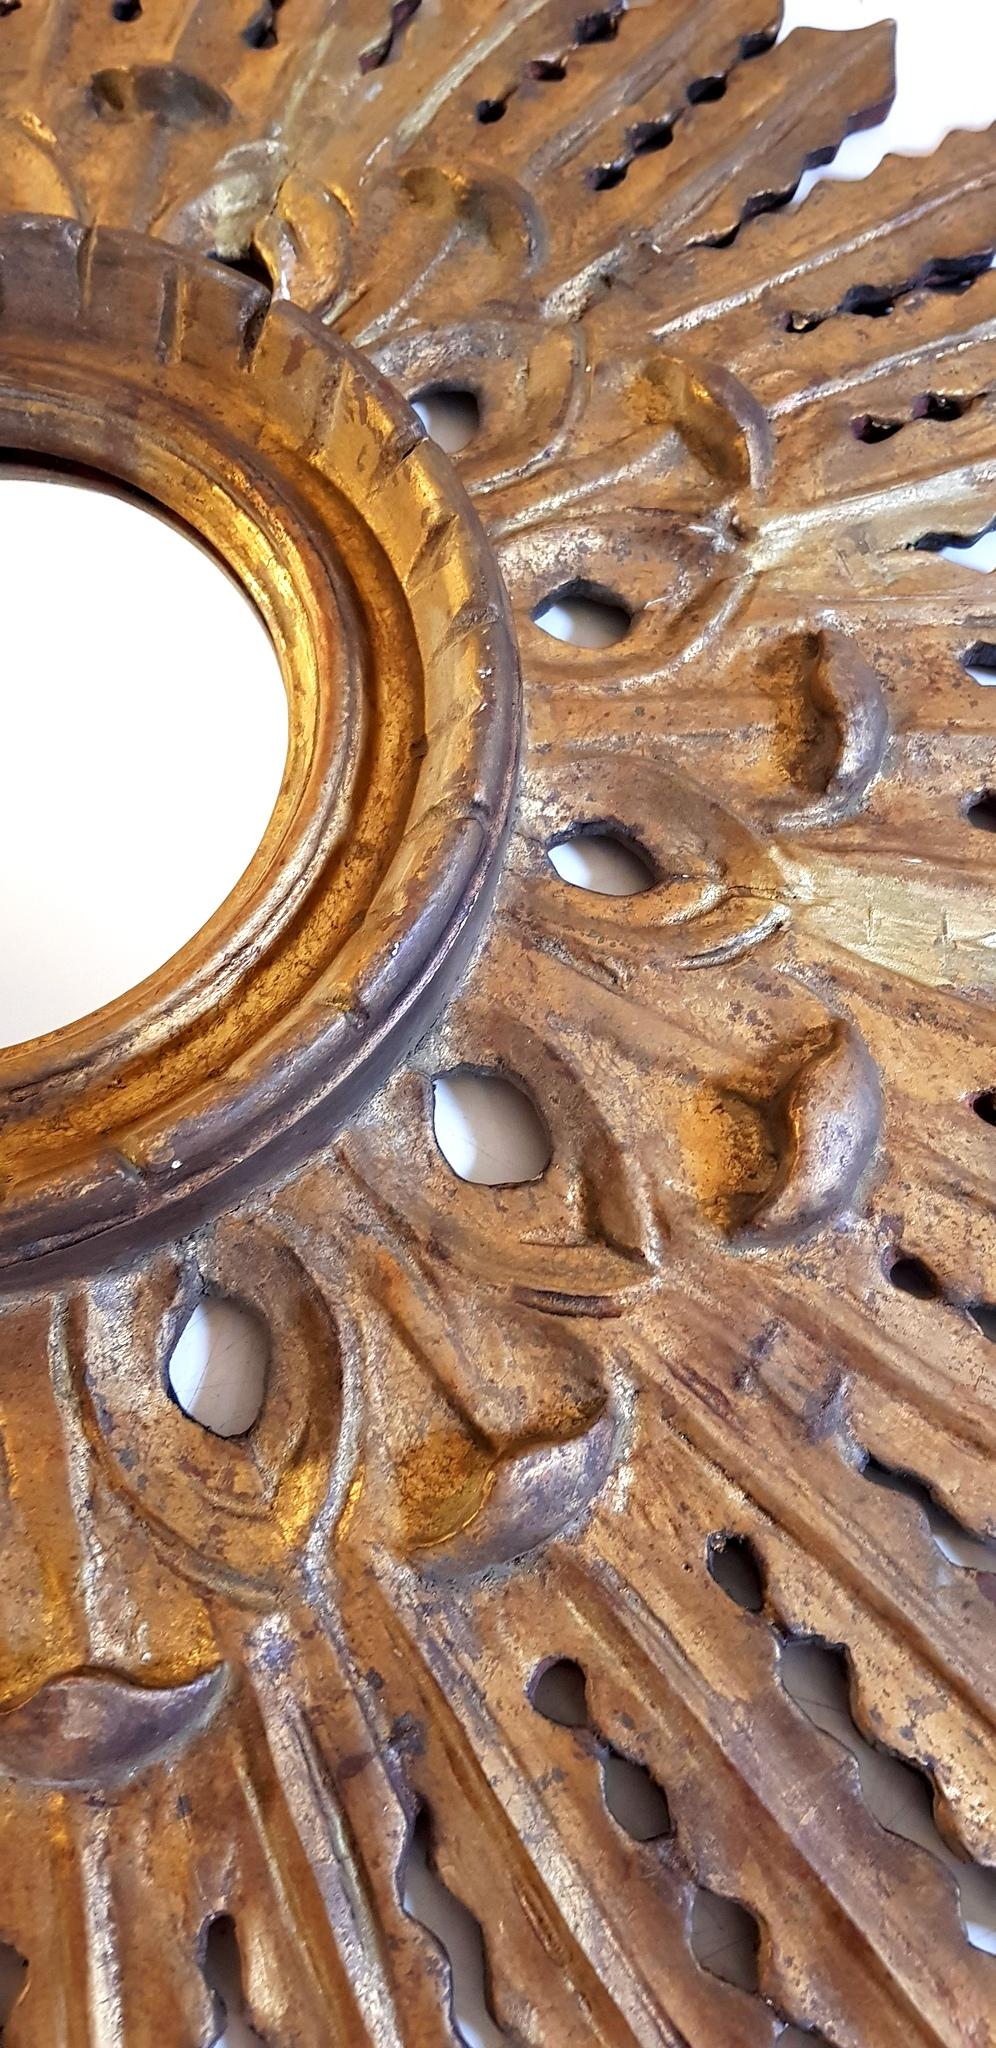 A Spanish 1950s wood carved sunburst mirror finished with gesso and gold leaf and a central frame surrounding the glass. Measure: Diameter of the mirror is 13 cm.